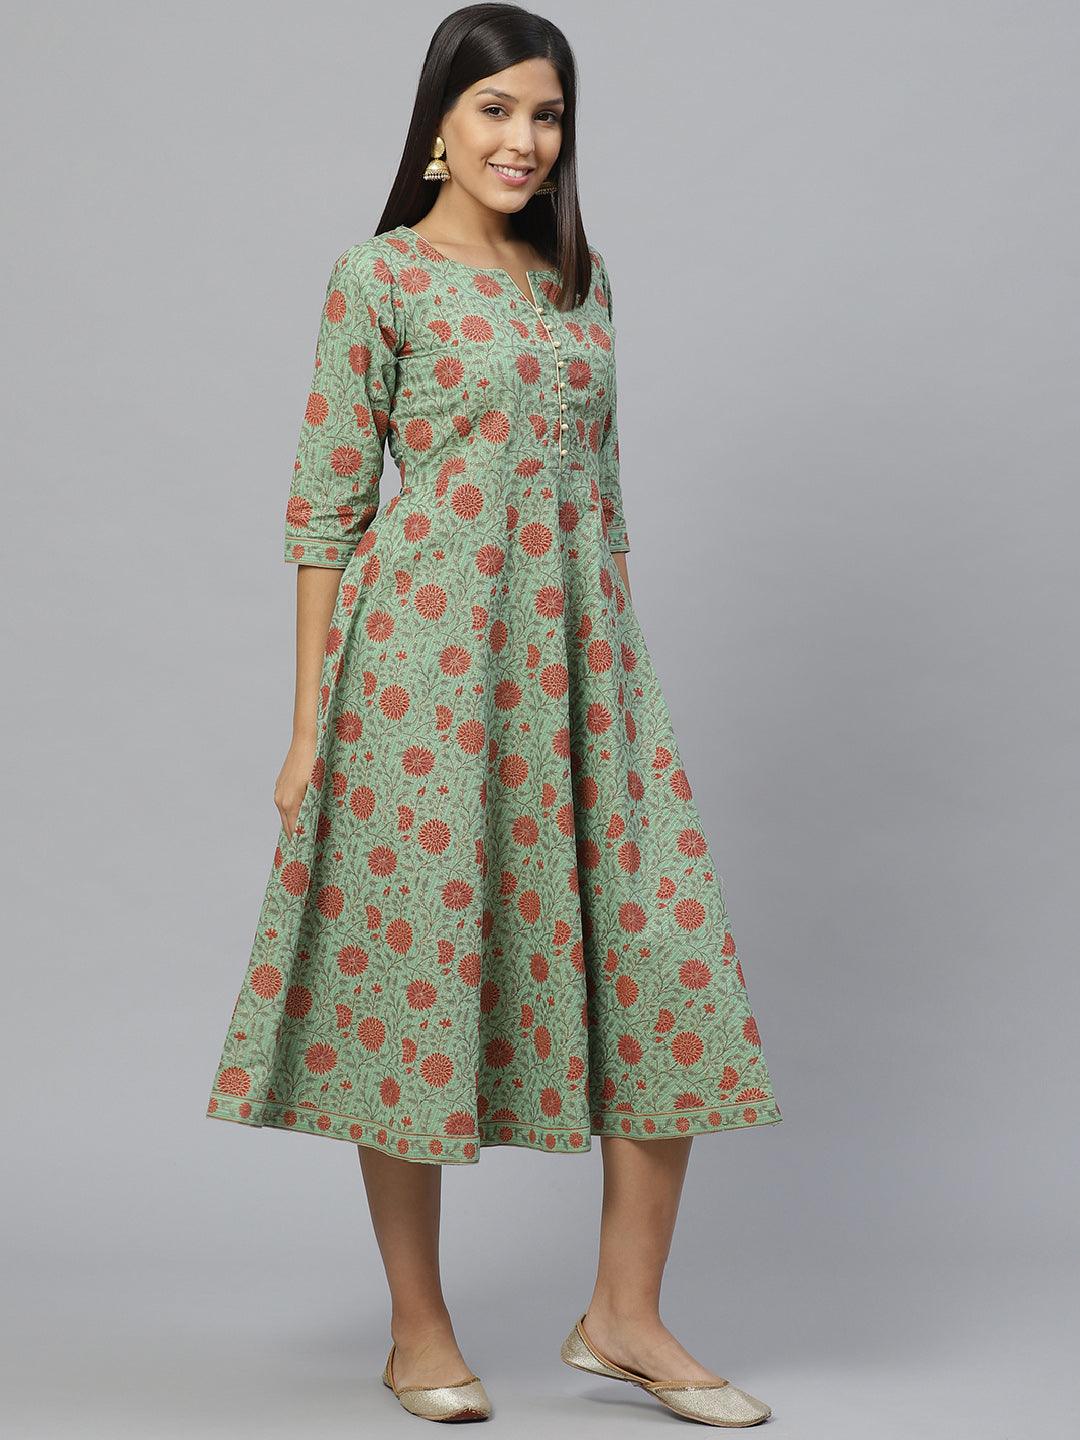 Green Printed Cotton Dress With Mask - Libas